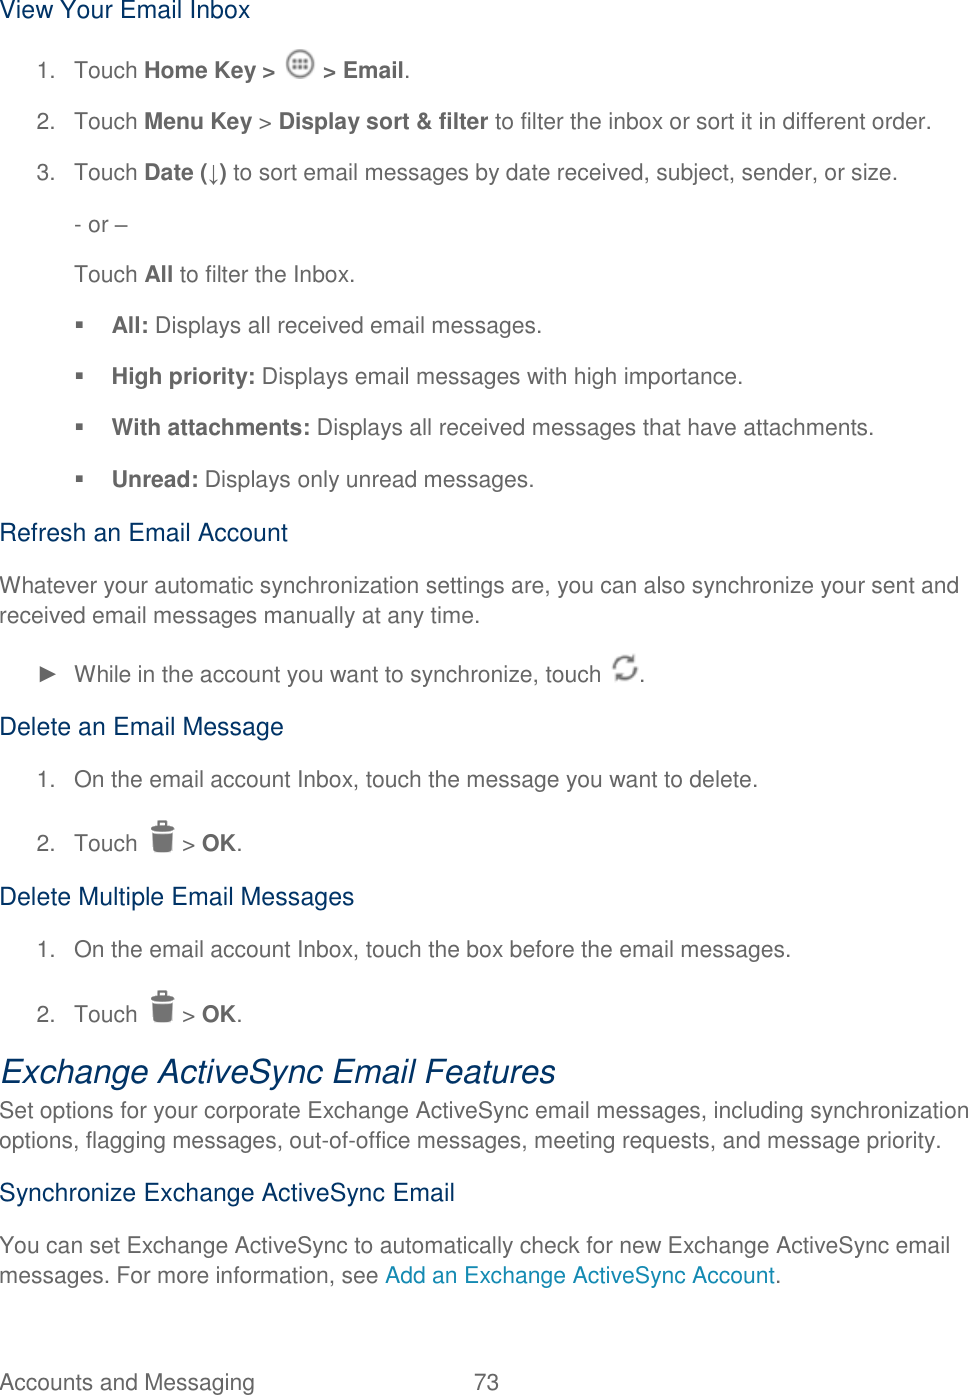 Accounts and Messaging  73   View Your Email Inbox 1.  Touch Home Key &gt;   &gt; Email. 2.  Touch Menu Key &gt; Display sort &amp; filter to filter the inbox or sort it in different order. 3.  Touch Date (↓) to sort email messages by date received, subject, sender, or size. - or –  Touch All to filter the Inbox.  All: Displays all received email messages.  High priority: Displays email messages with high importance.  With attachments: Displays all received messages that have attachments.  Unread: Displays only unread messages. Refresh an Email Account Whatever your automatic synchronization settings are, you can also synchronize your sent and received email messages manually at any time. ►  While in the account you want to synchronize, touch  . Delete an Email Message 1.  On the email account Inbox, touch the message you want to delete. 2.  Touch   &gt; OK. Delete Multiple Email Messages 1.  On the email account Inbox, touch the box before the email messages. 2.  Touch   &gt; OK. Exchange ActiveSync Email Features Set options for your corporate Exchange ActiveSync email messages, including synchronization options, flagging messages, out-of-office messages, meeting requests, and message priority. Synchronize Exchange ActiveSync Email You can set Exchange ActiveSync to automatically check for new Exchange ActiveSync email messages. For more information, see Add an Exchange ActiveSync Account. 